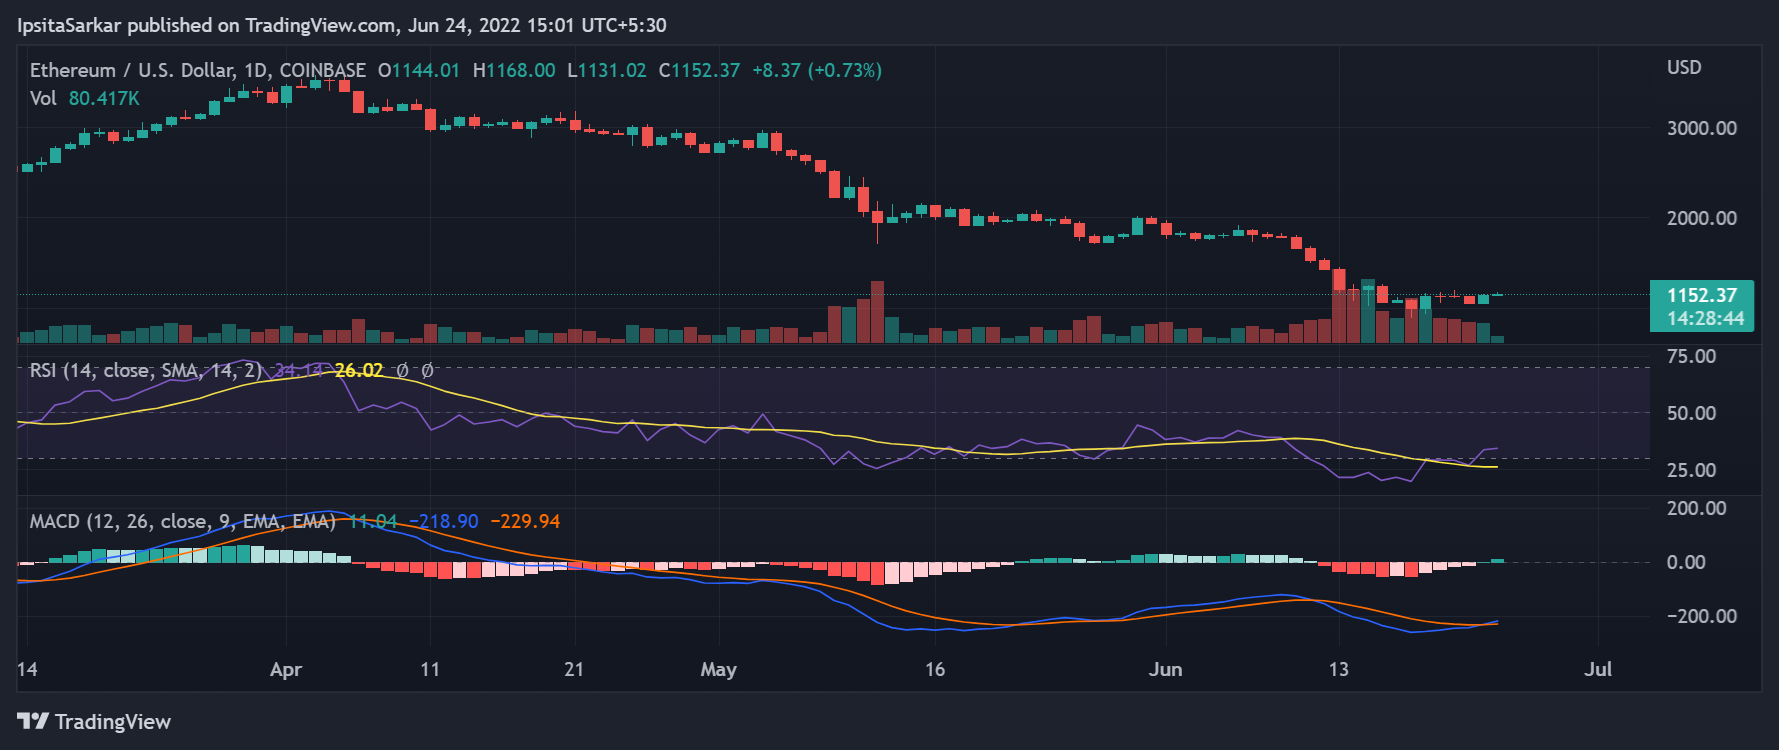 Ethereum's RSI did see a sudden rise, climbing to 34.14.